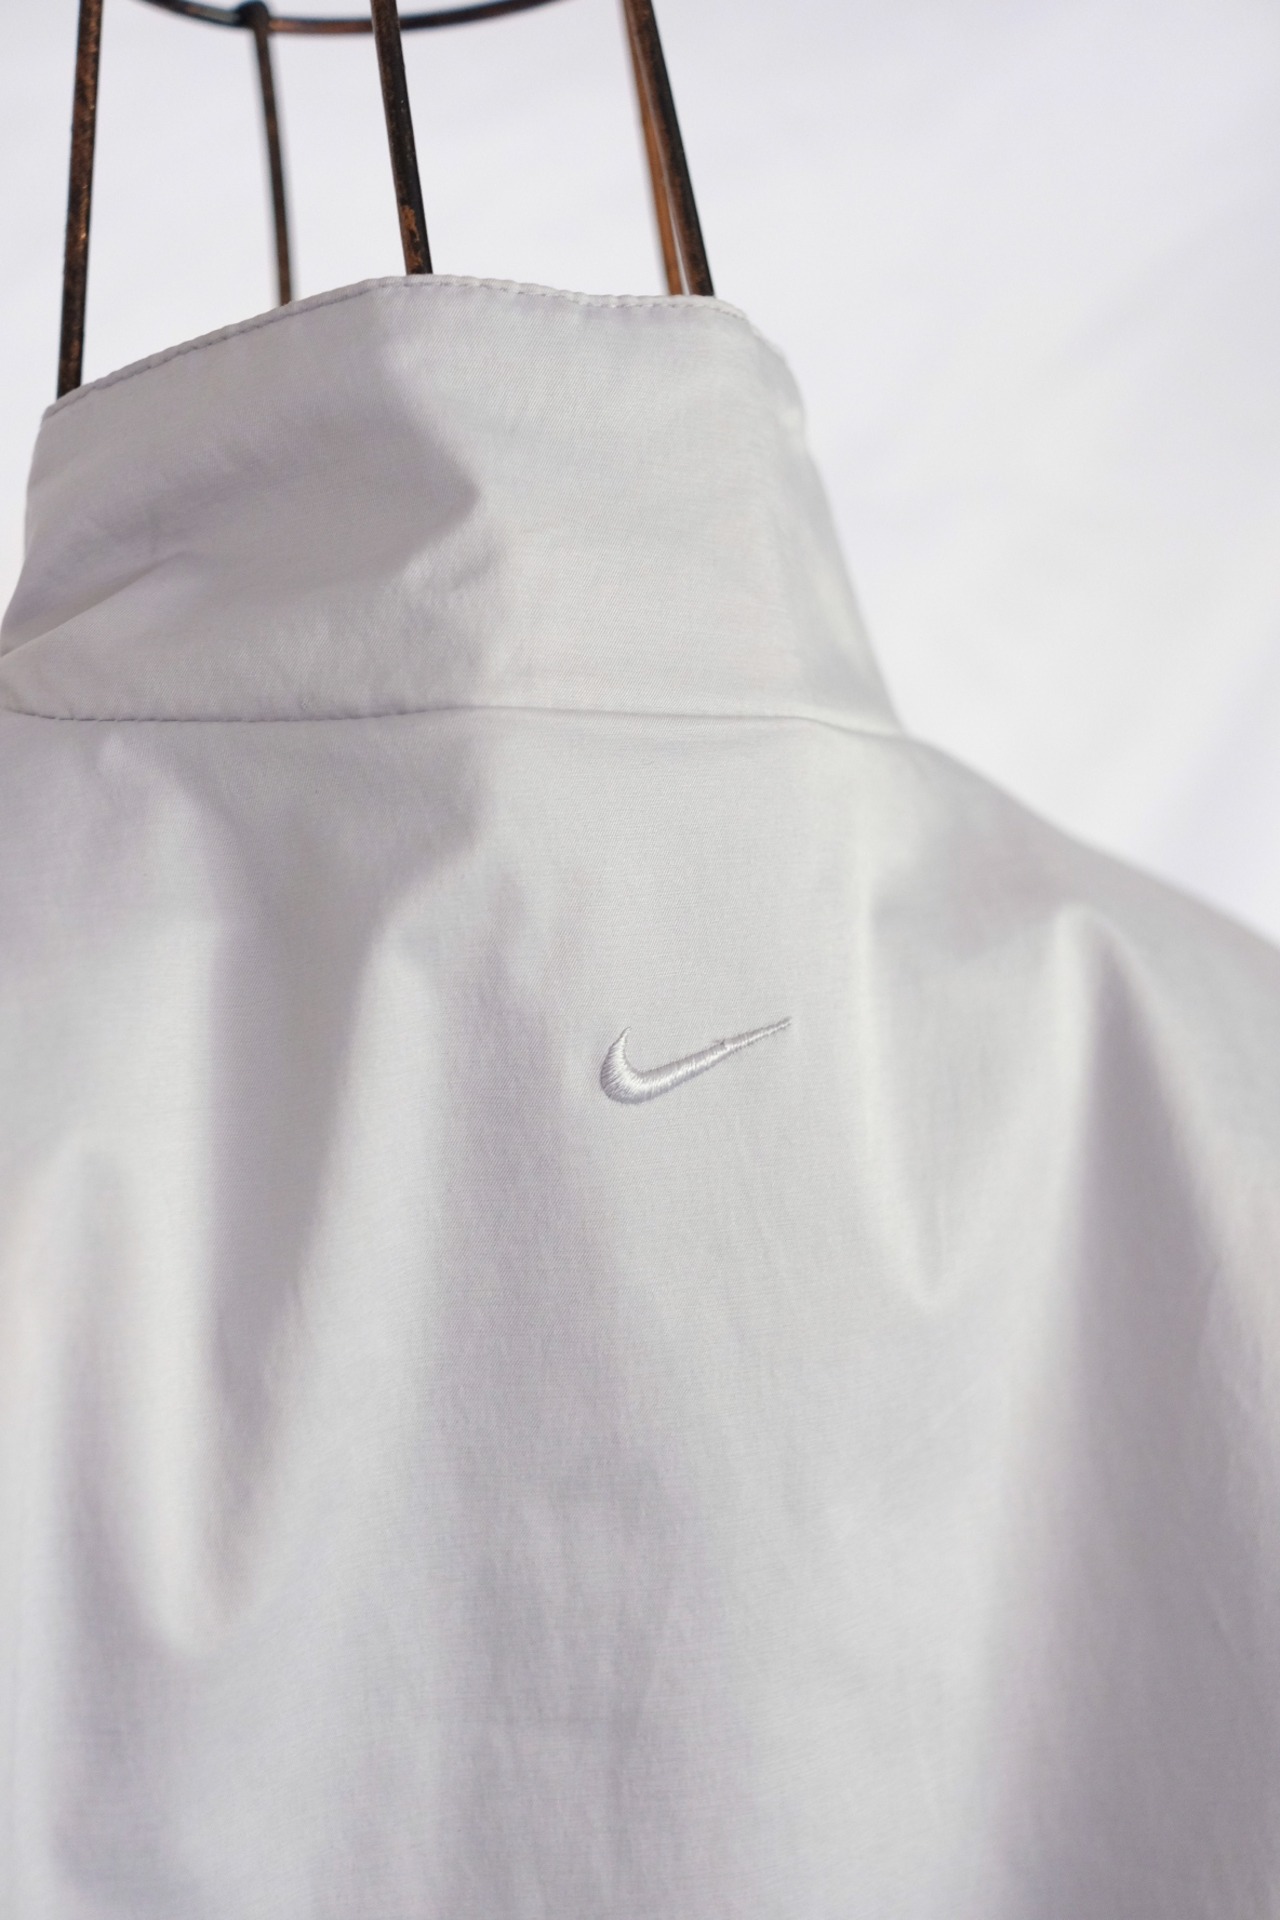 “NIKE” pullover top